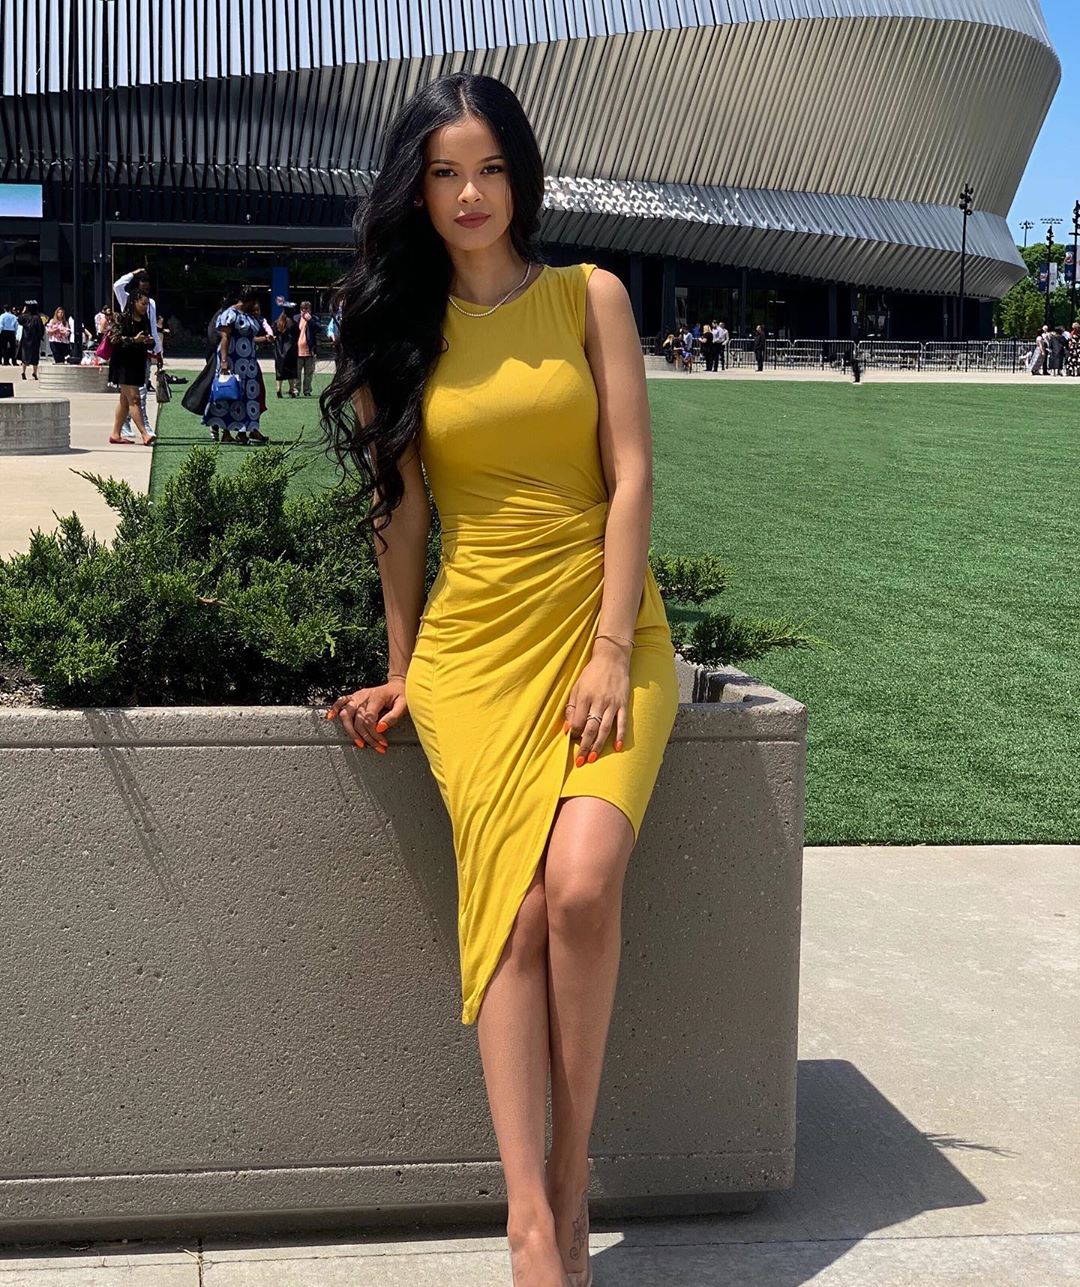 Karizma Houglass flaunts her Body Figure in yellow one piece. Know more about her height, weight, body measurement, net worth, salary and many more